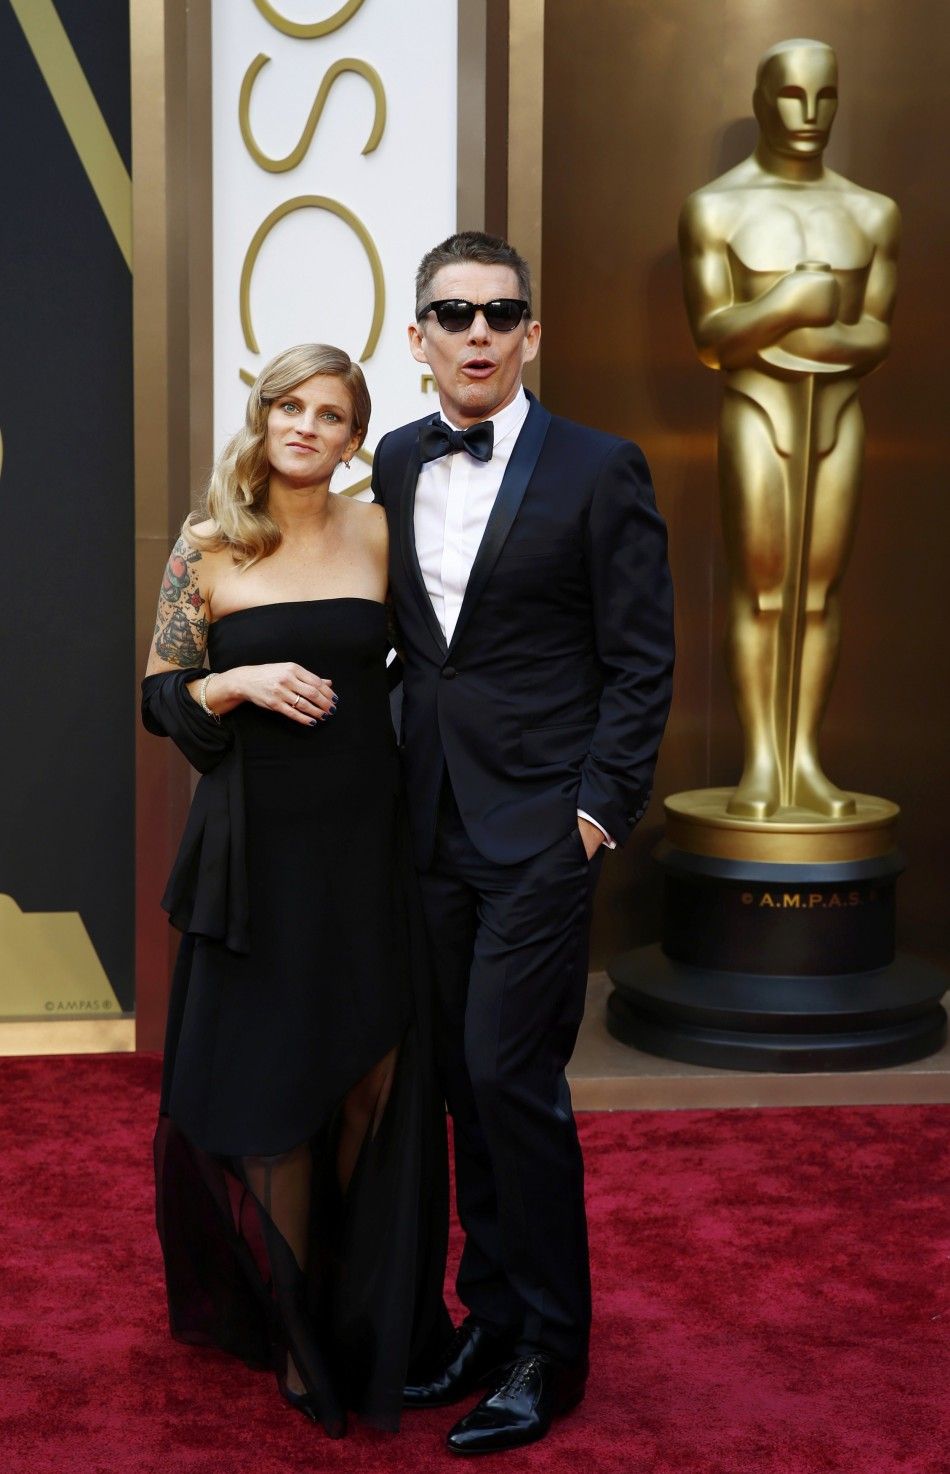 Actor Ethan Hawke and wife Ryan arrive at the 86th Academy Awards in Hollywood